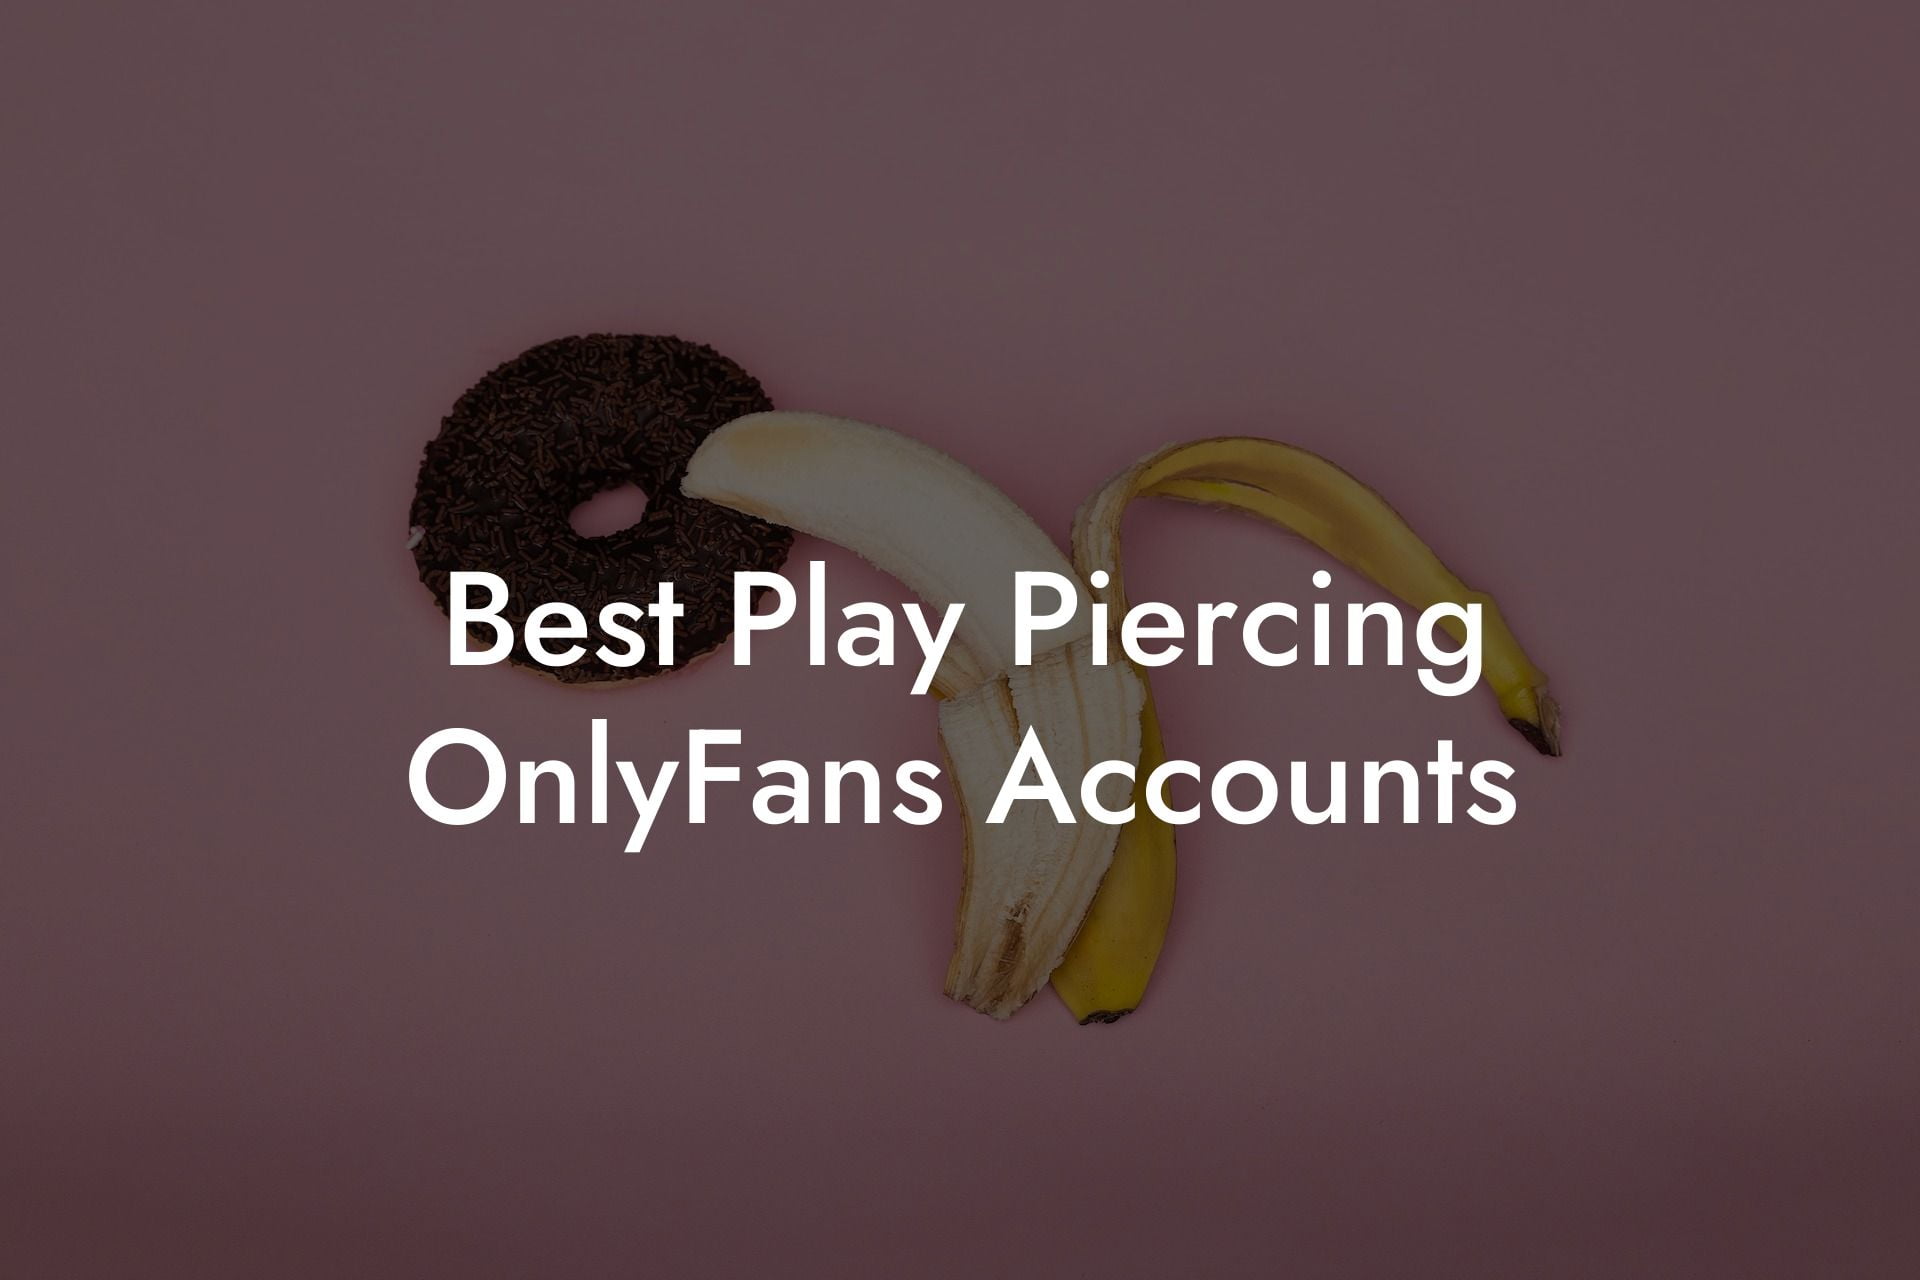 Best Play Piercing OnlyFans Accounts